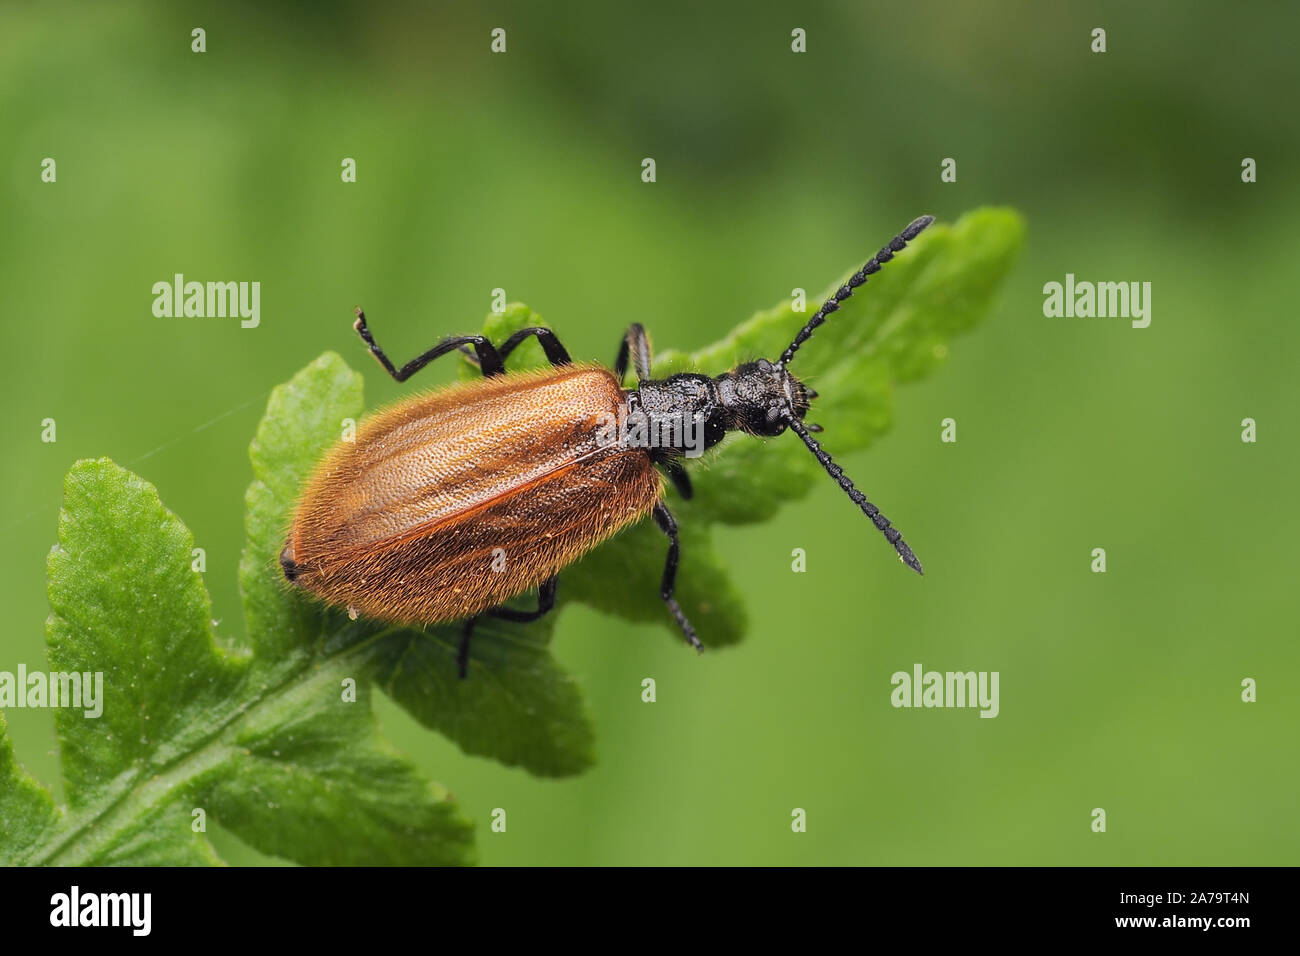 Lagria hirta beetle perched on fern. Tipperary, Ireland Stock Photo